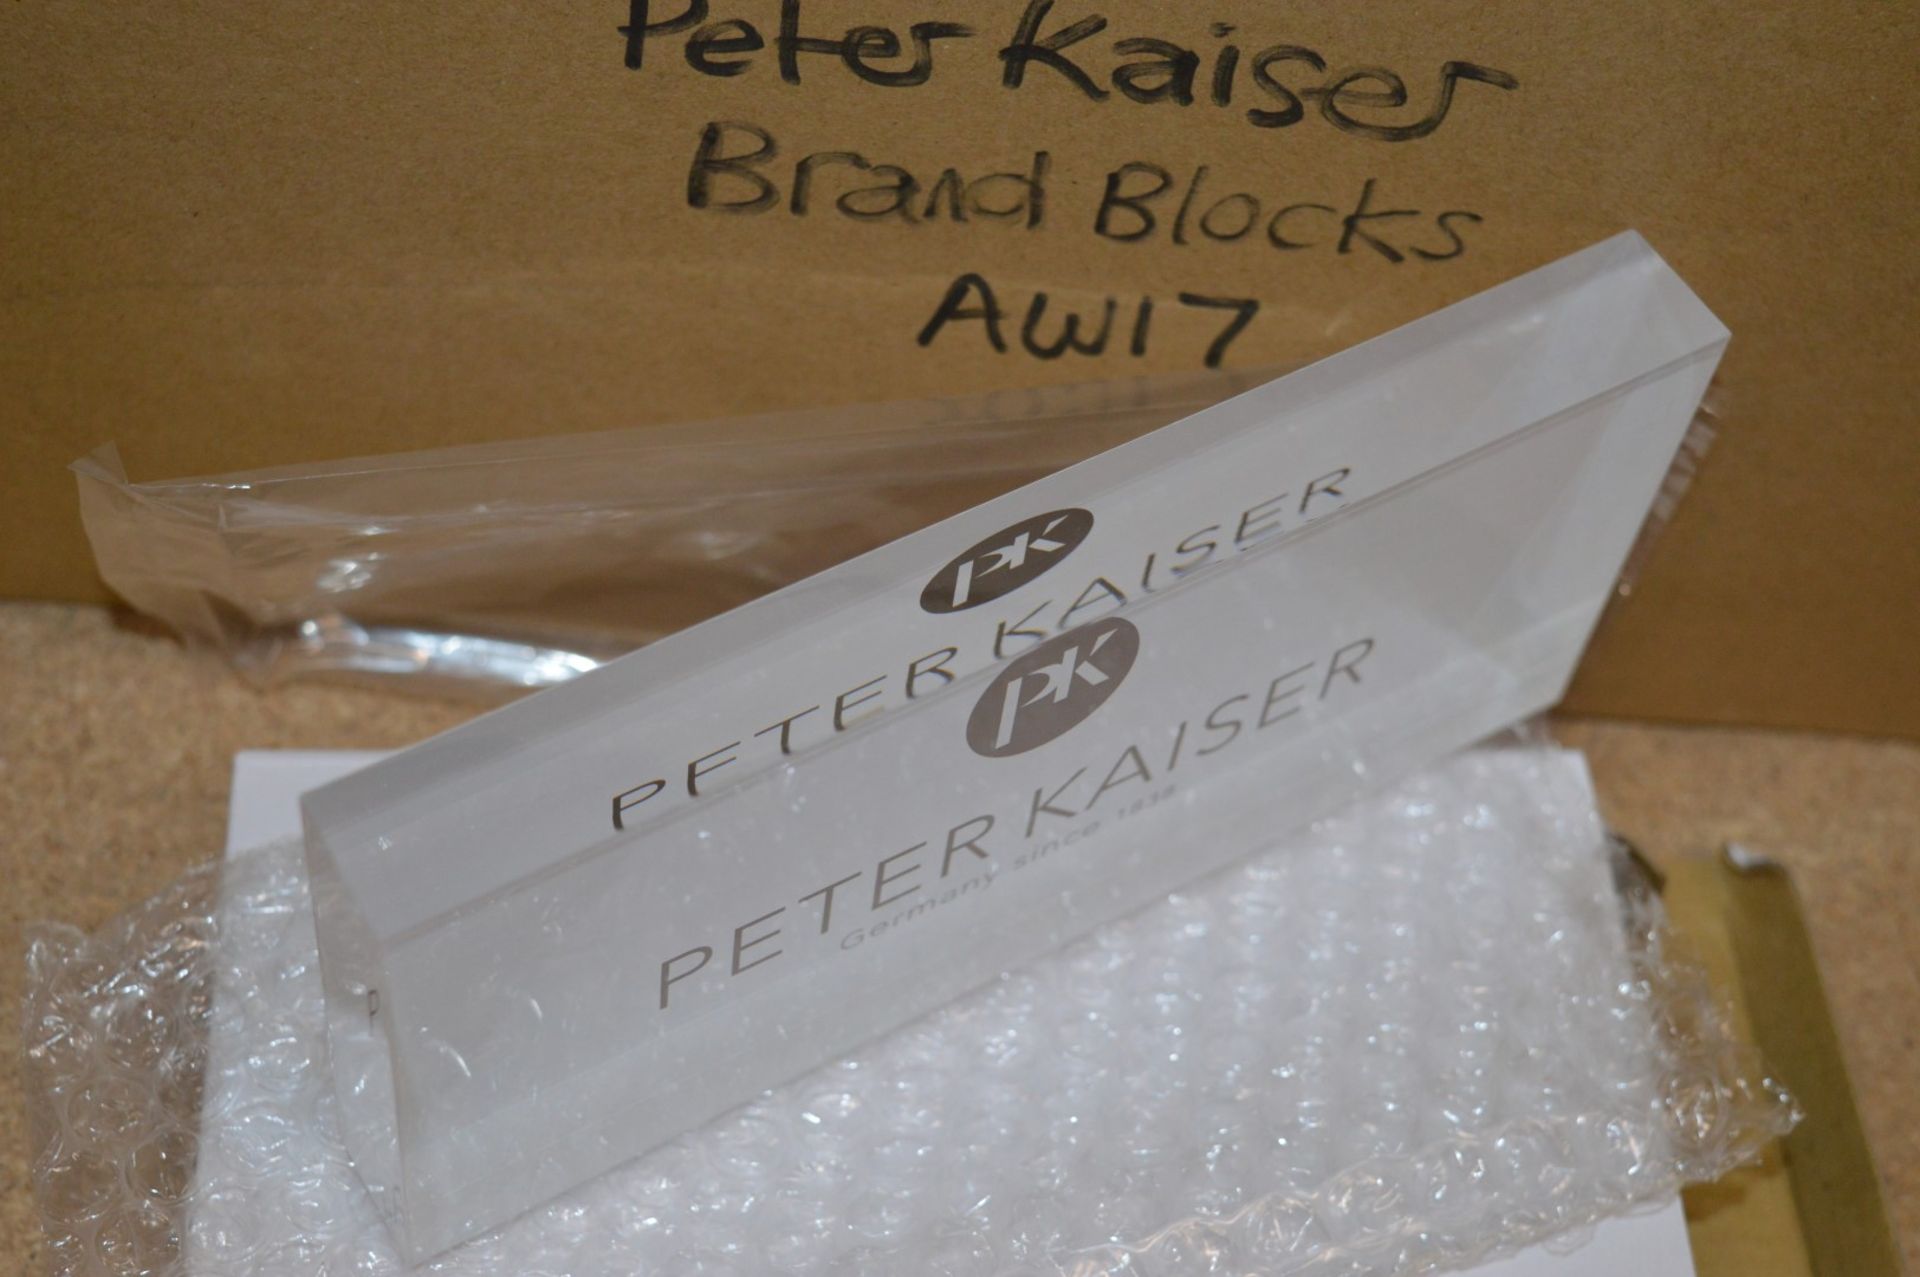 11 x Peter Kaiser Fashion Advertisement Acrylic Blocks - 18 x 11 cms - New and Boxed - CL285 - Ref - Image 2 of 3